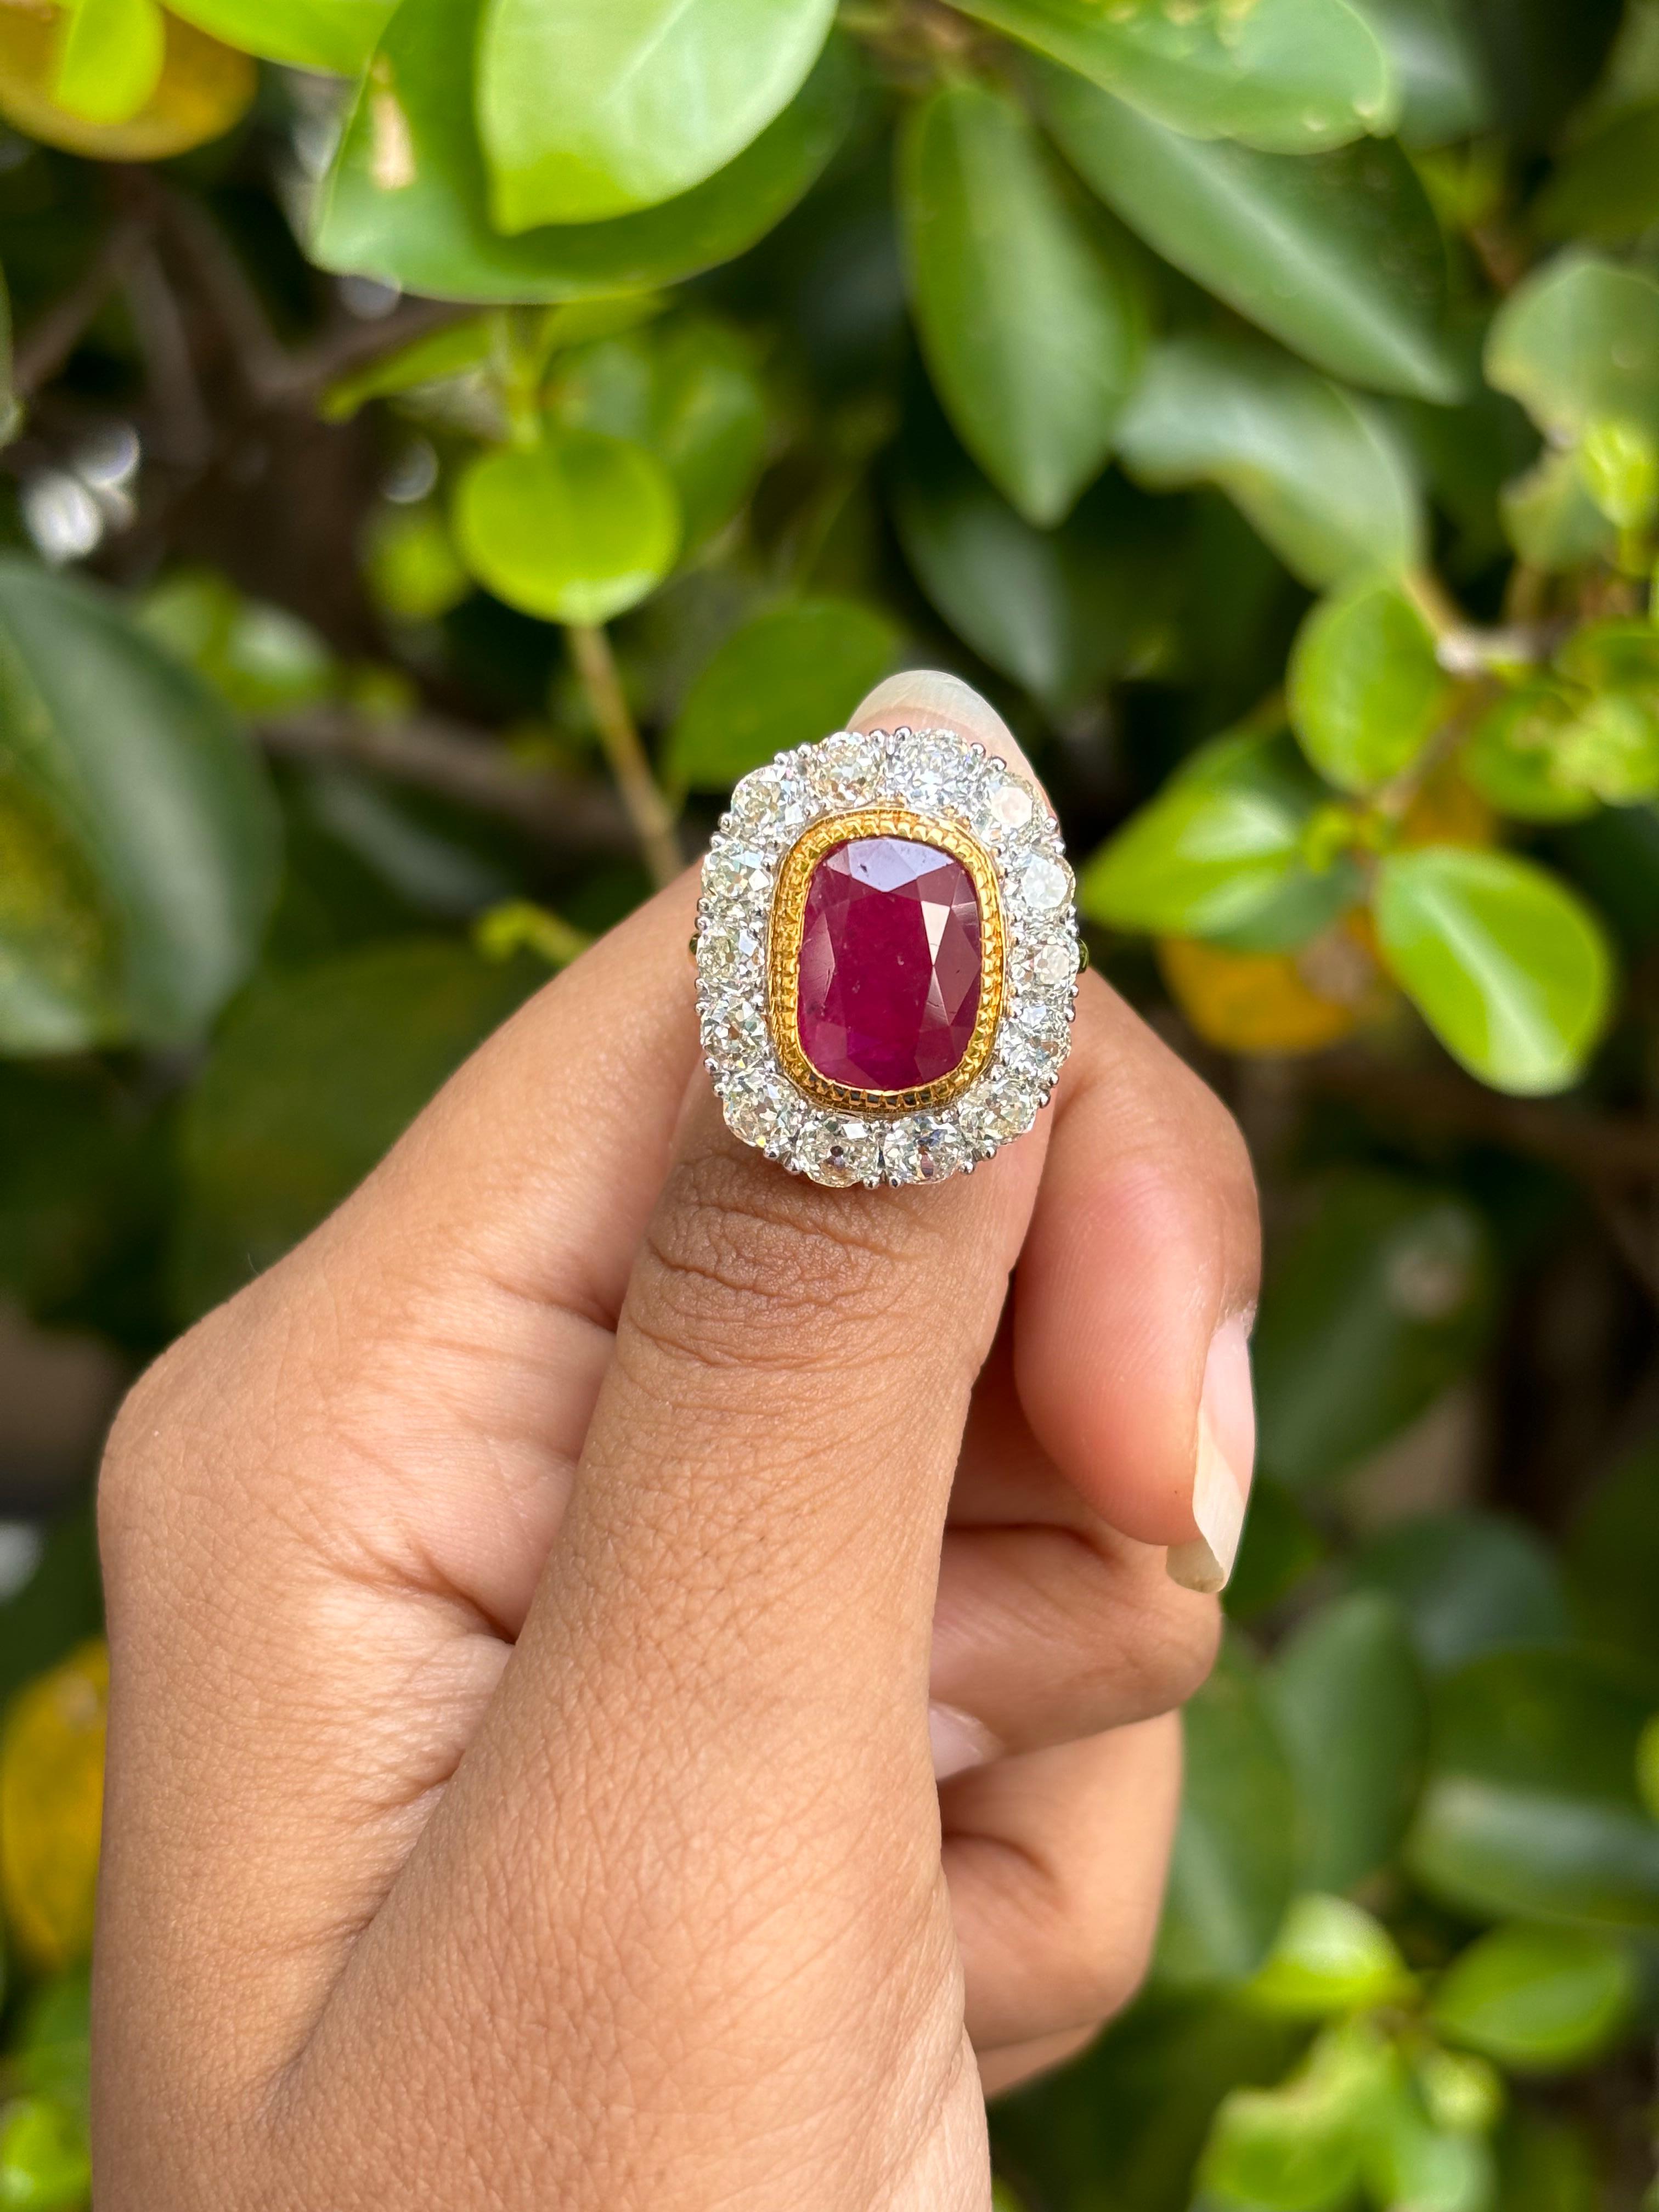 Introducing a stunning Art Deco masterpiece, a striking statement ring that showcases a remarkable 4.35 Carat unheated Ruby. Its perfect cushion shape and captivating red color exude an enchanting allure that radiates both indoors and outdoors.